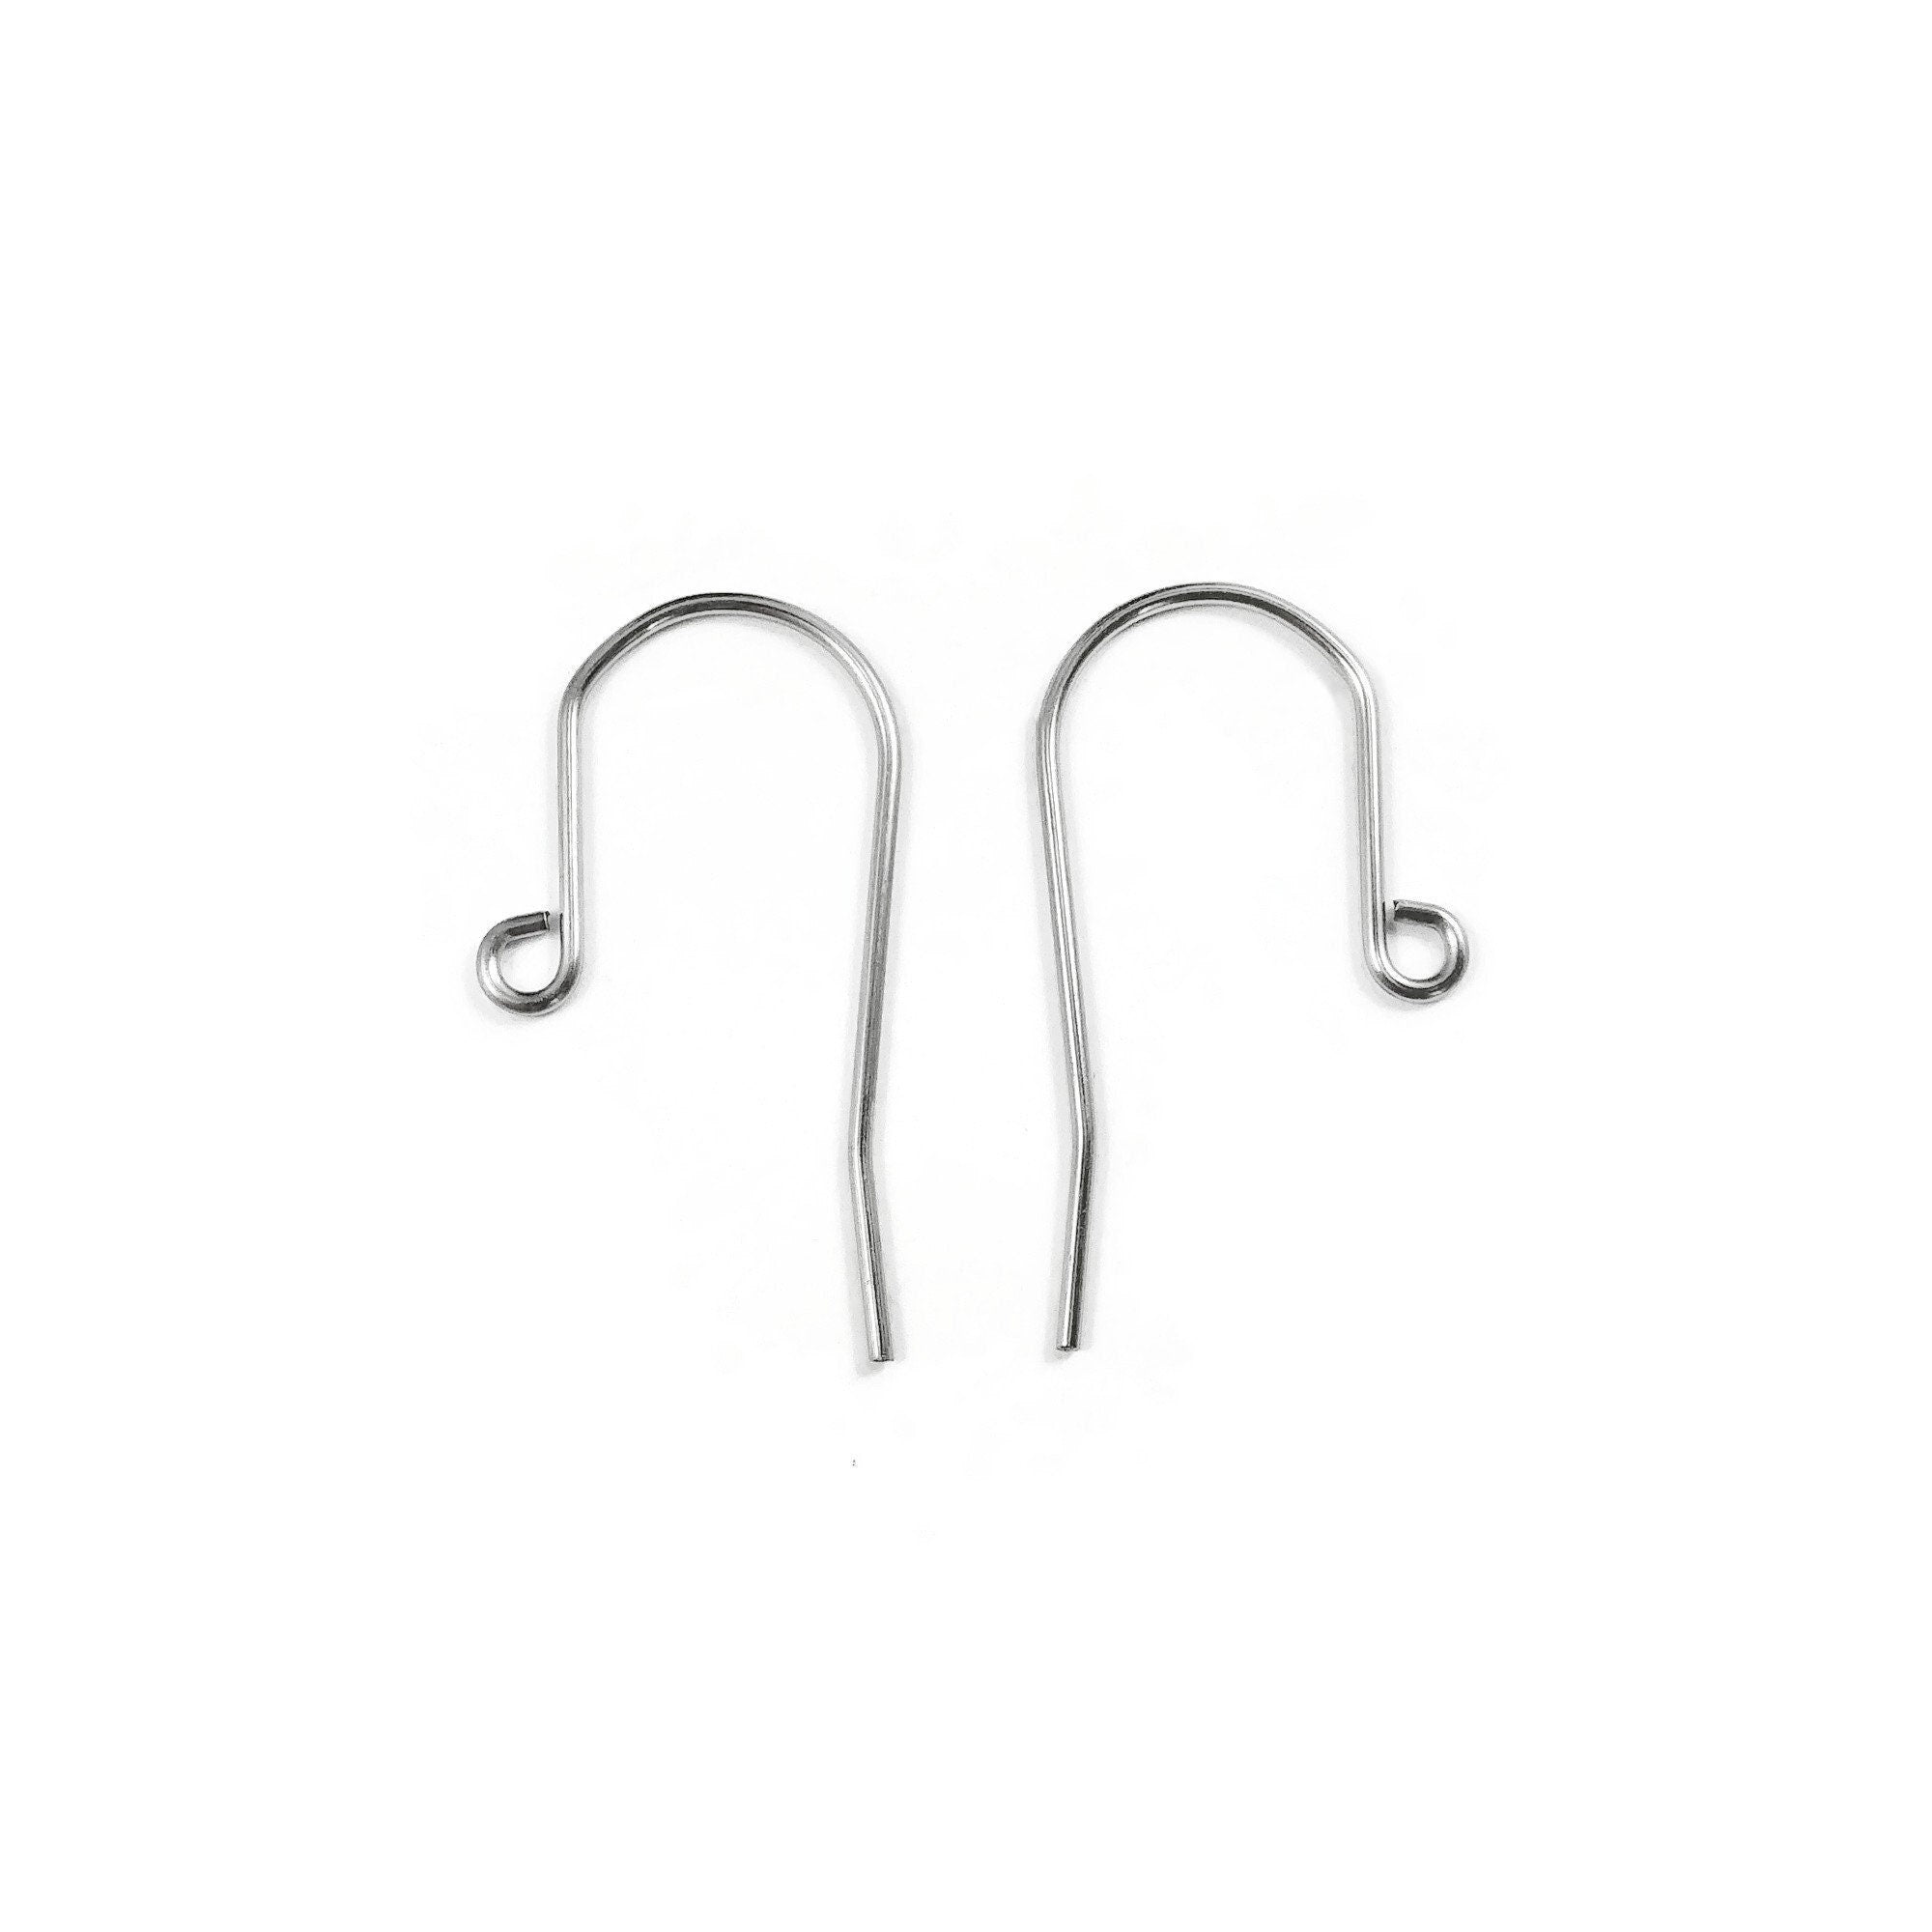 QLINLEAF 200pcs Hypoallergenic Bead & Spring Surgical Stainless Steel Earring Hooks with 200pcs Earring Backs for Jewelry Making DIY (Silver), Sil